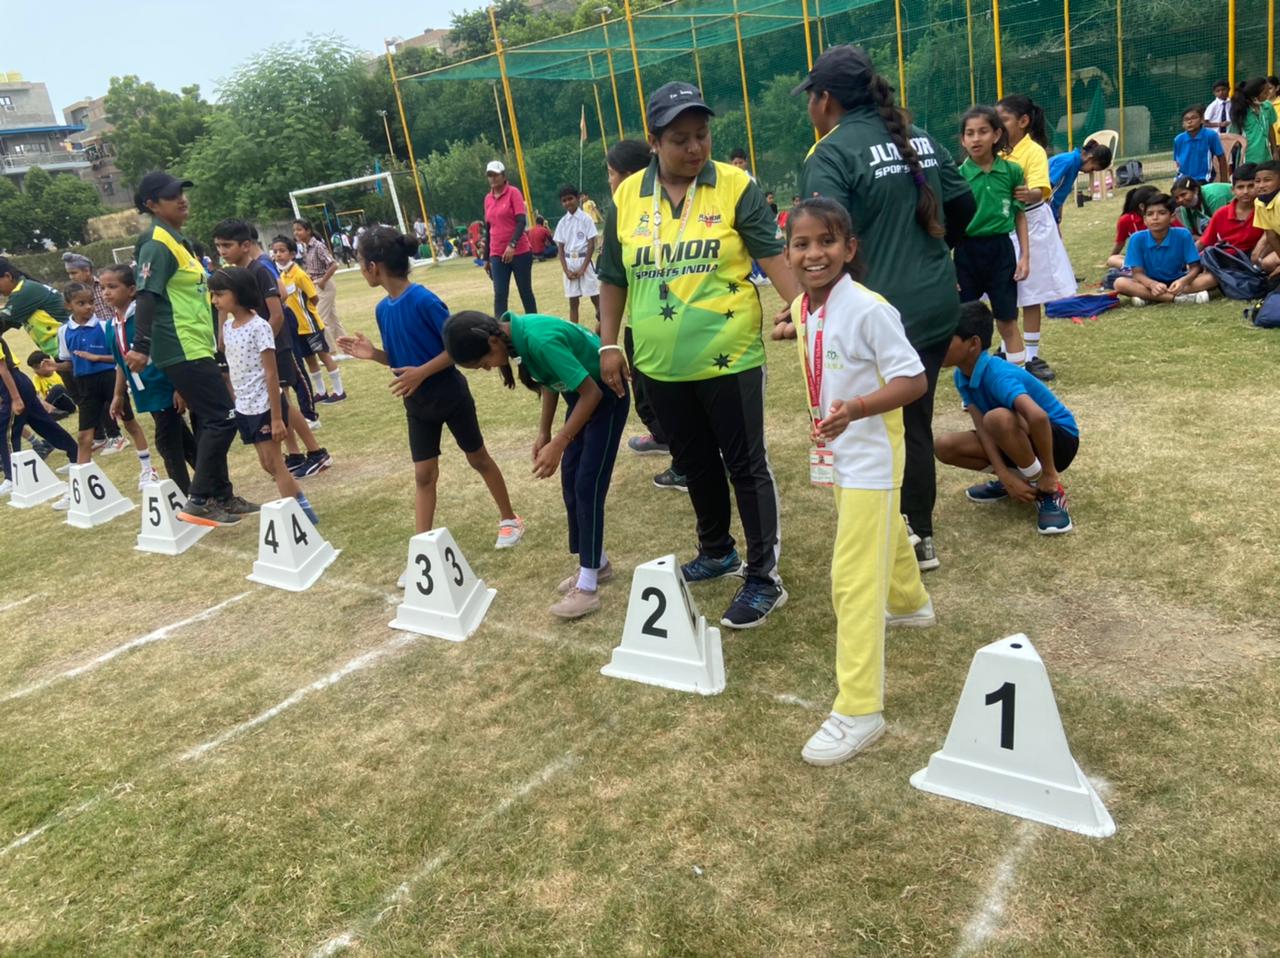 Dwarka Mini Athletics Session -1 conducted by Junior Sports India